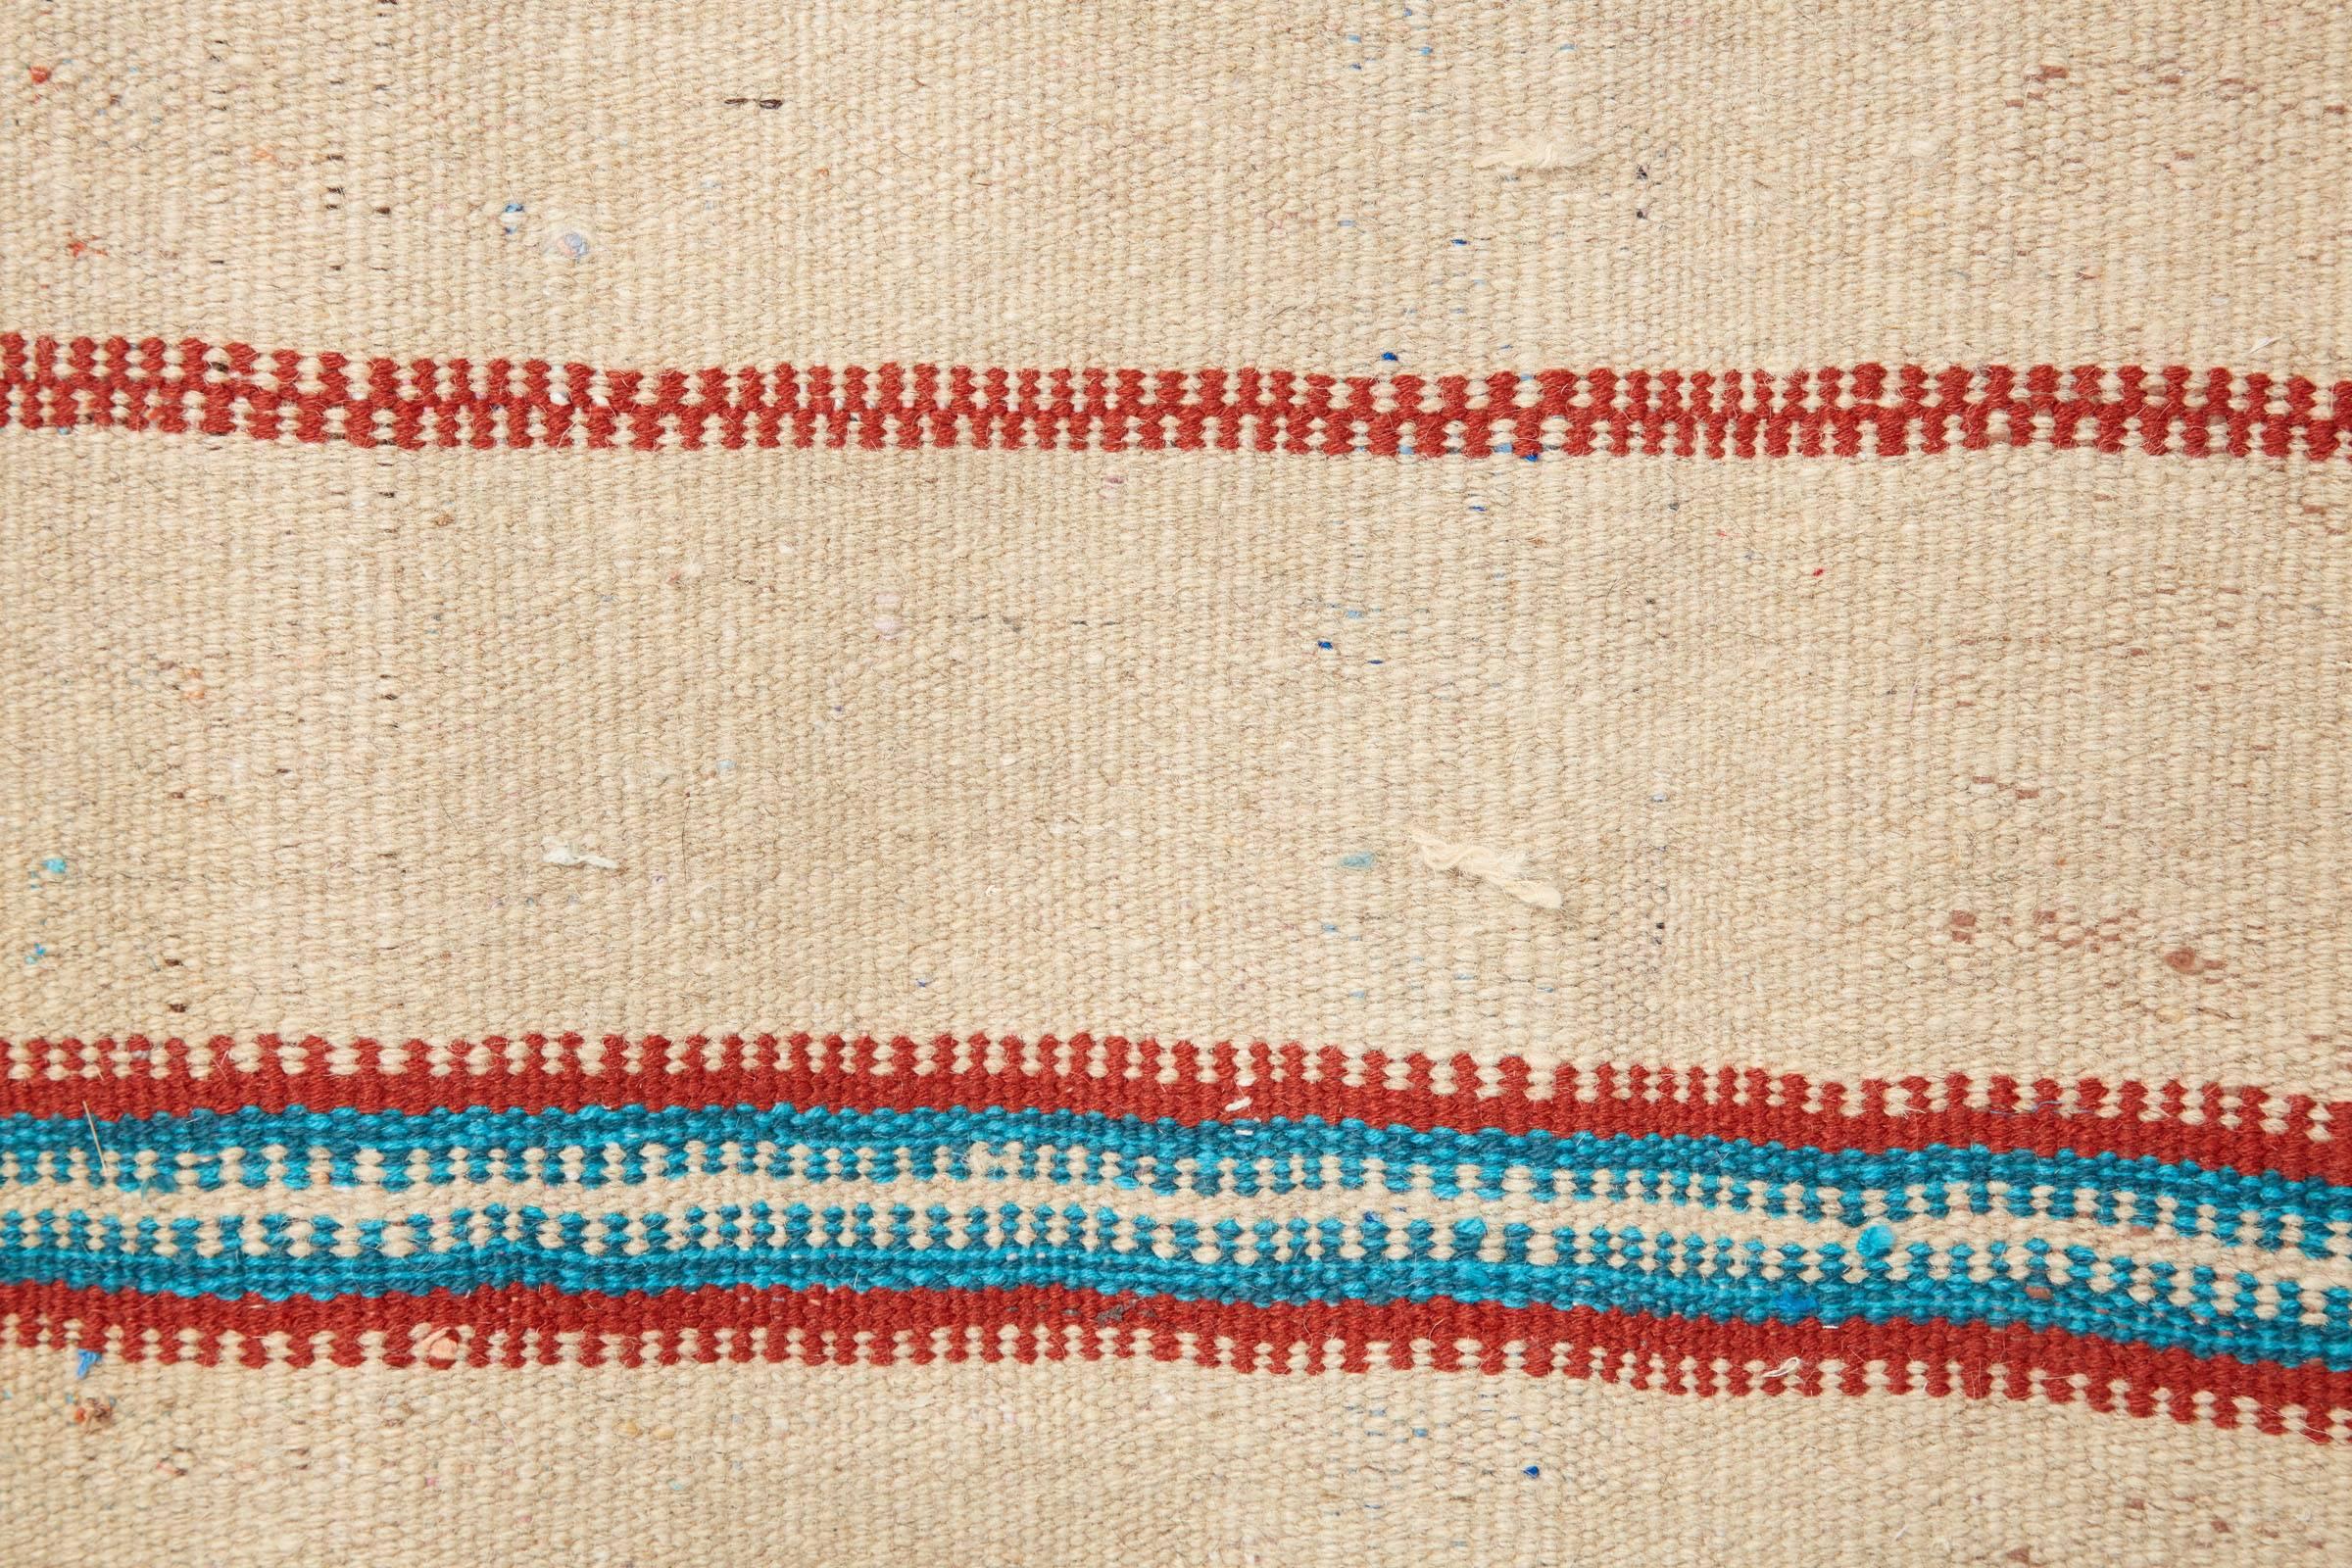 20th century flat-weave Berber rug from Africa
Fun and lively colored stripes on off white background.